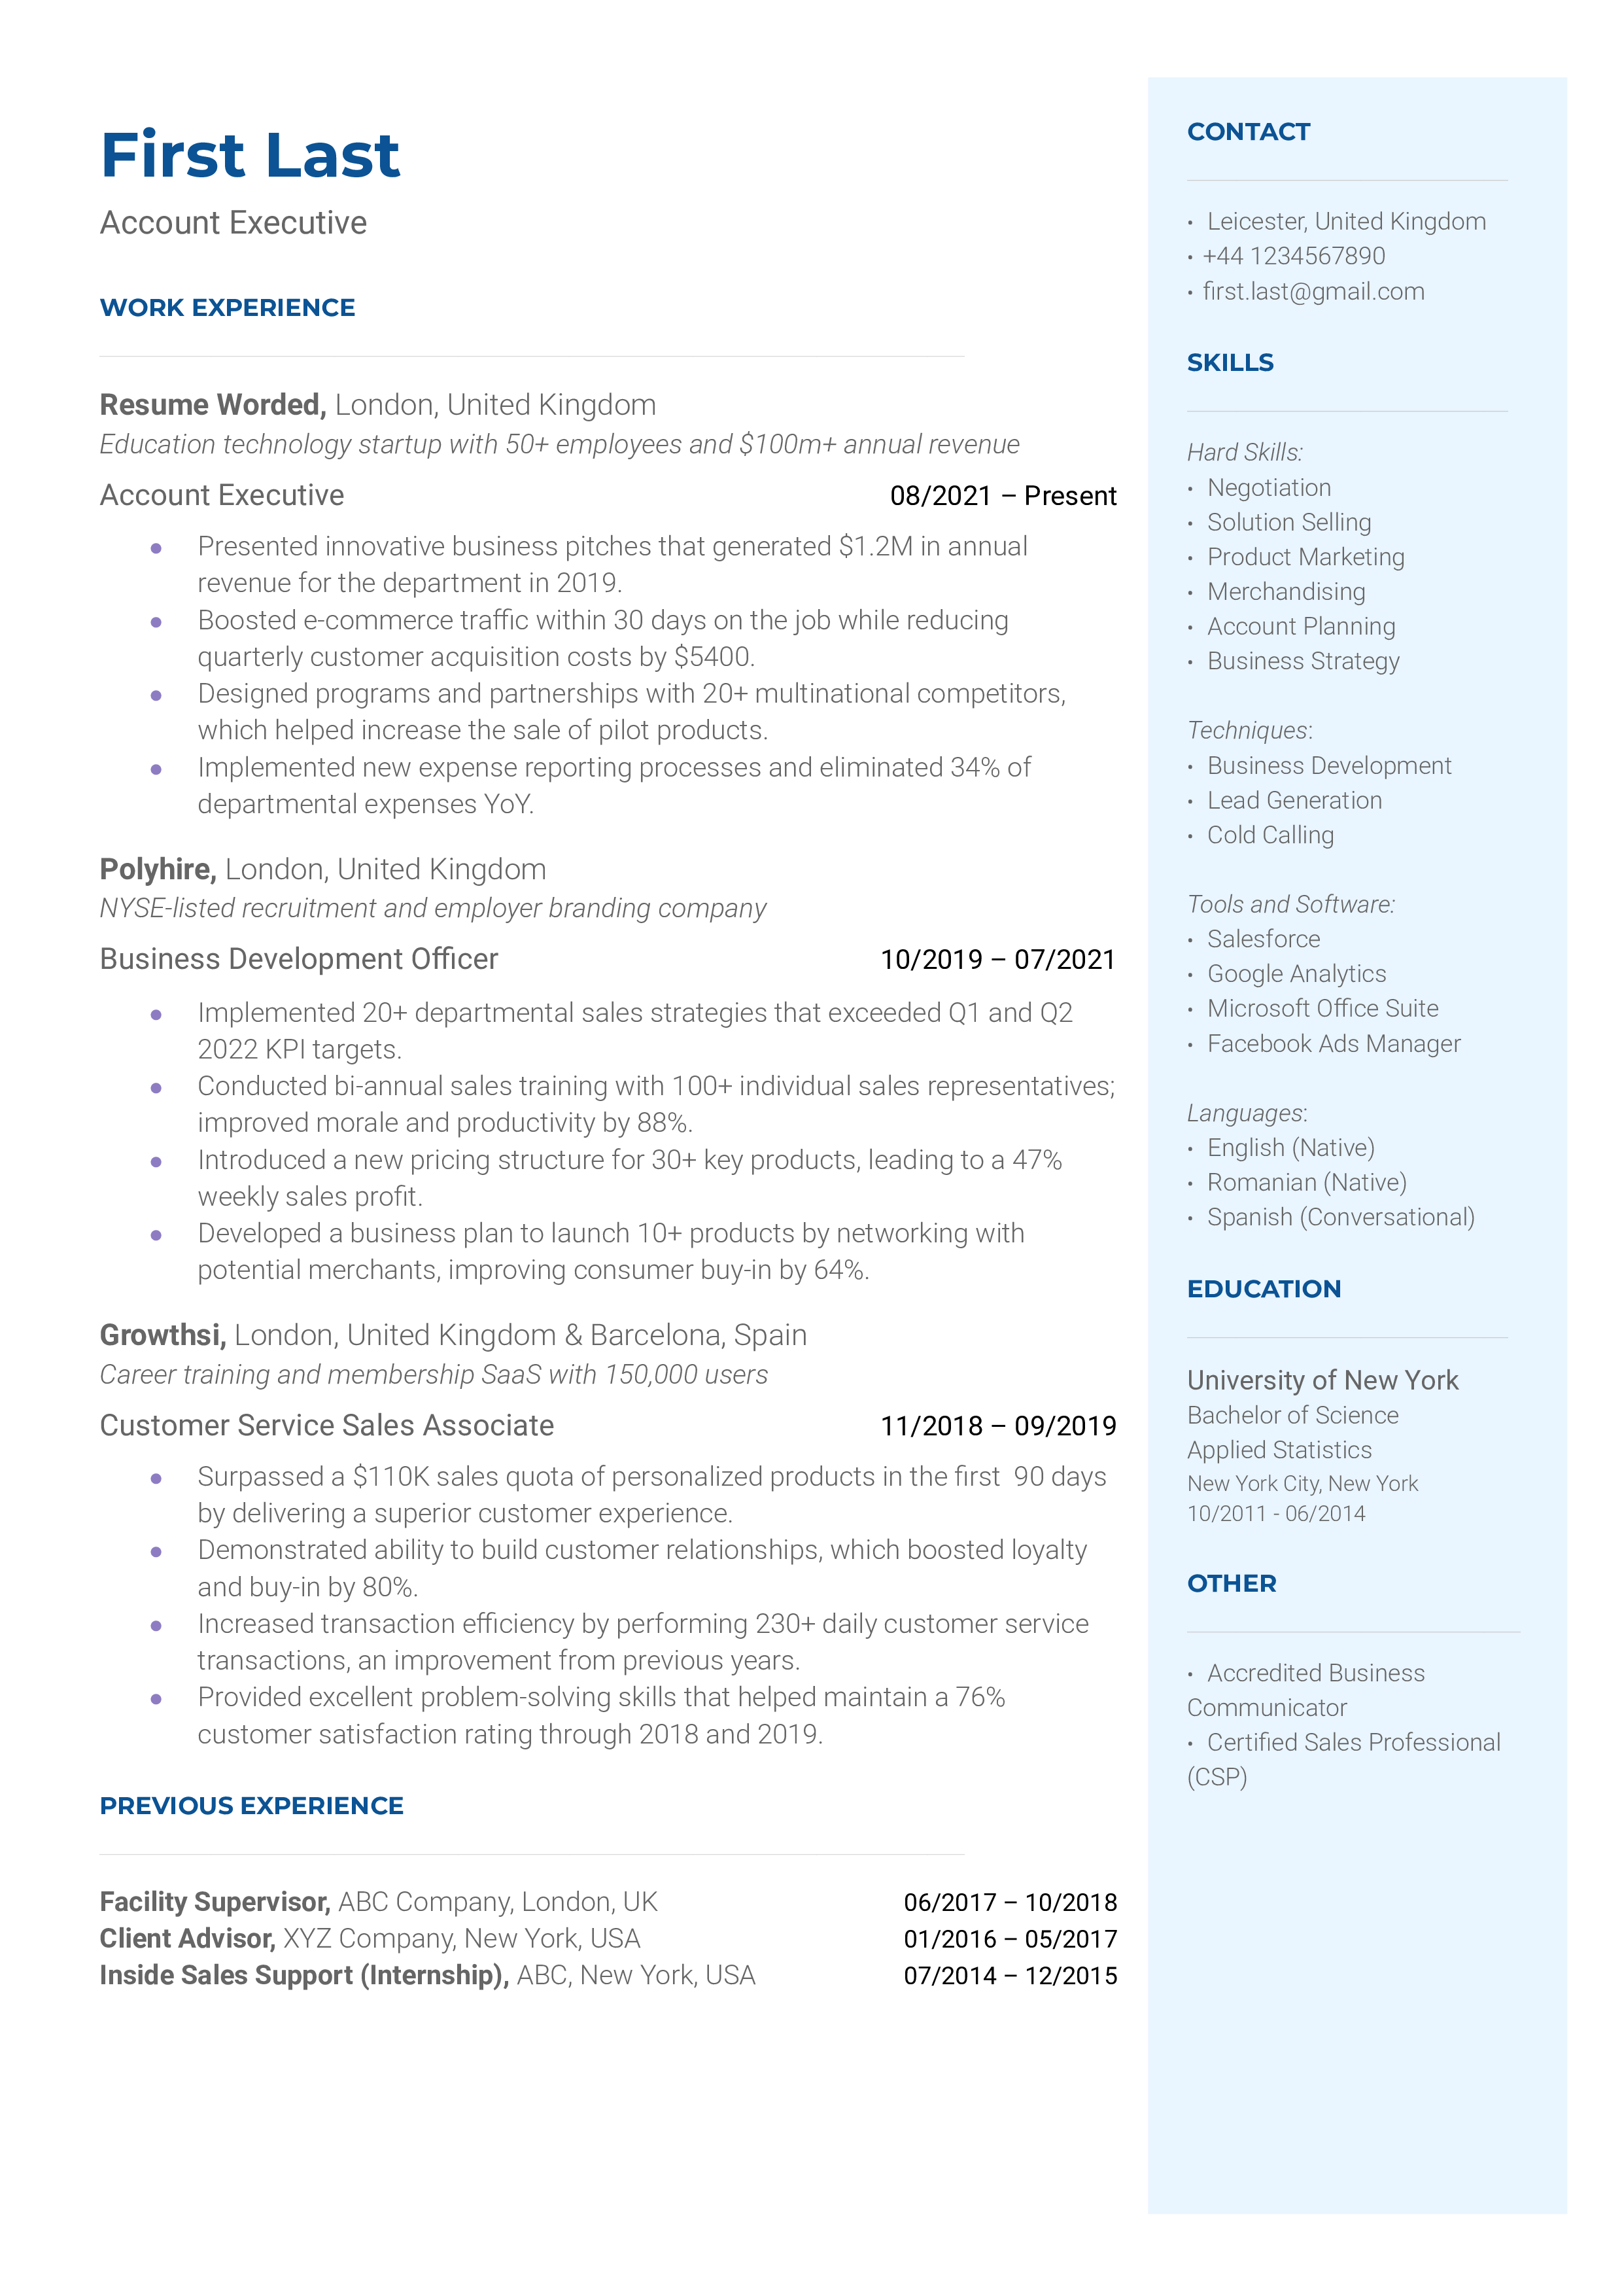 An Account Executive resume highlighting experience in developing relationships with clients, identifying business opportunities, and meeting sales targets